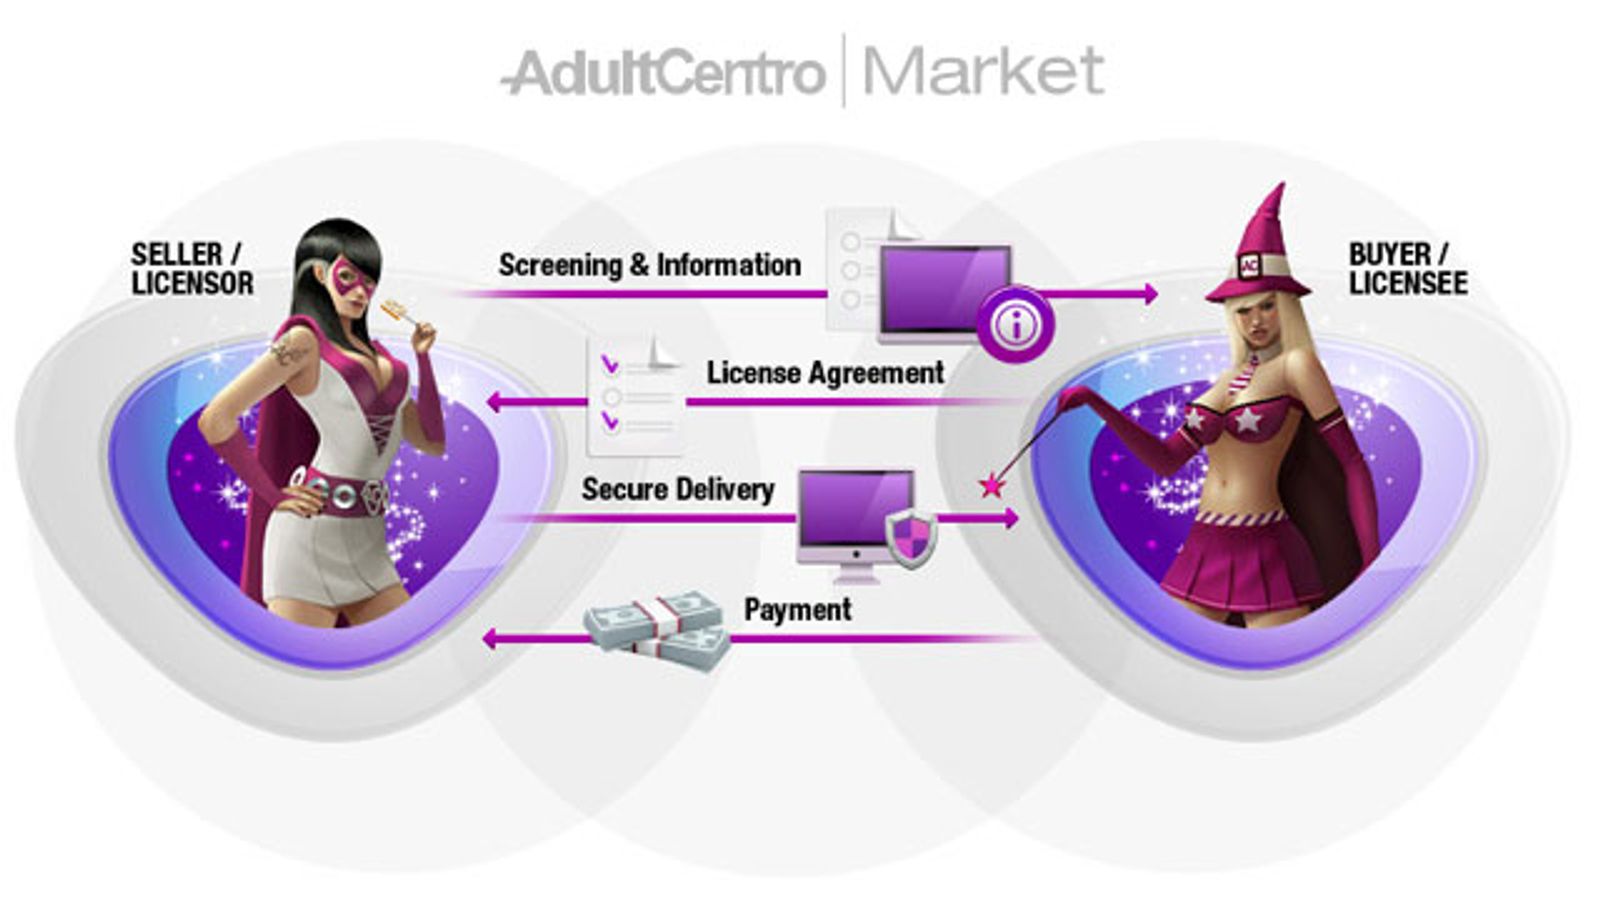 AdultCentro Market Officially Launches